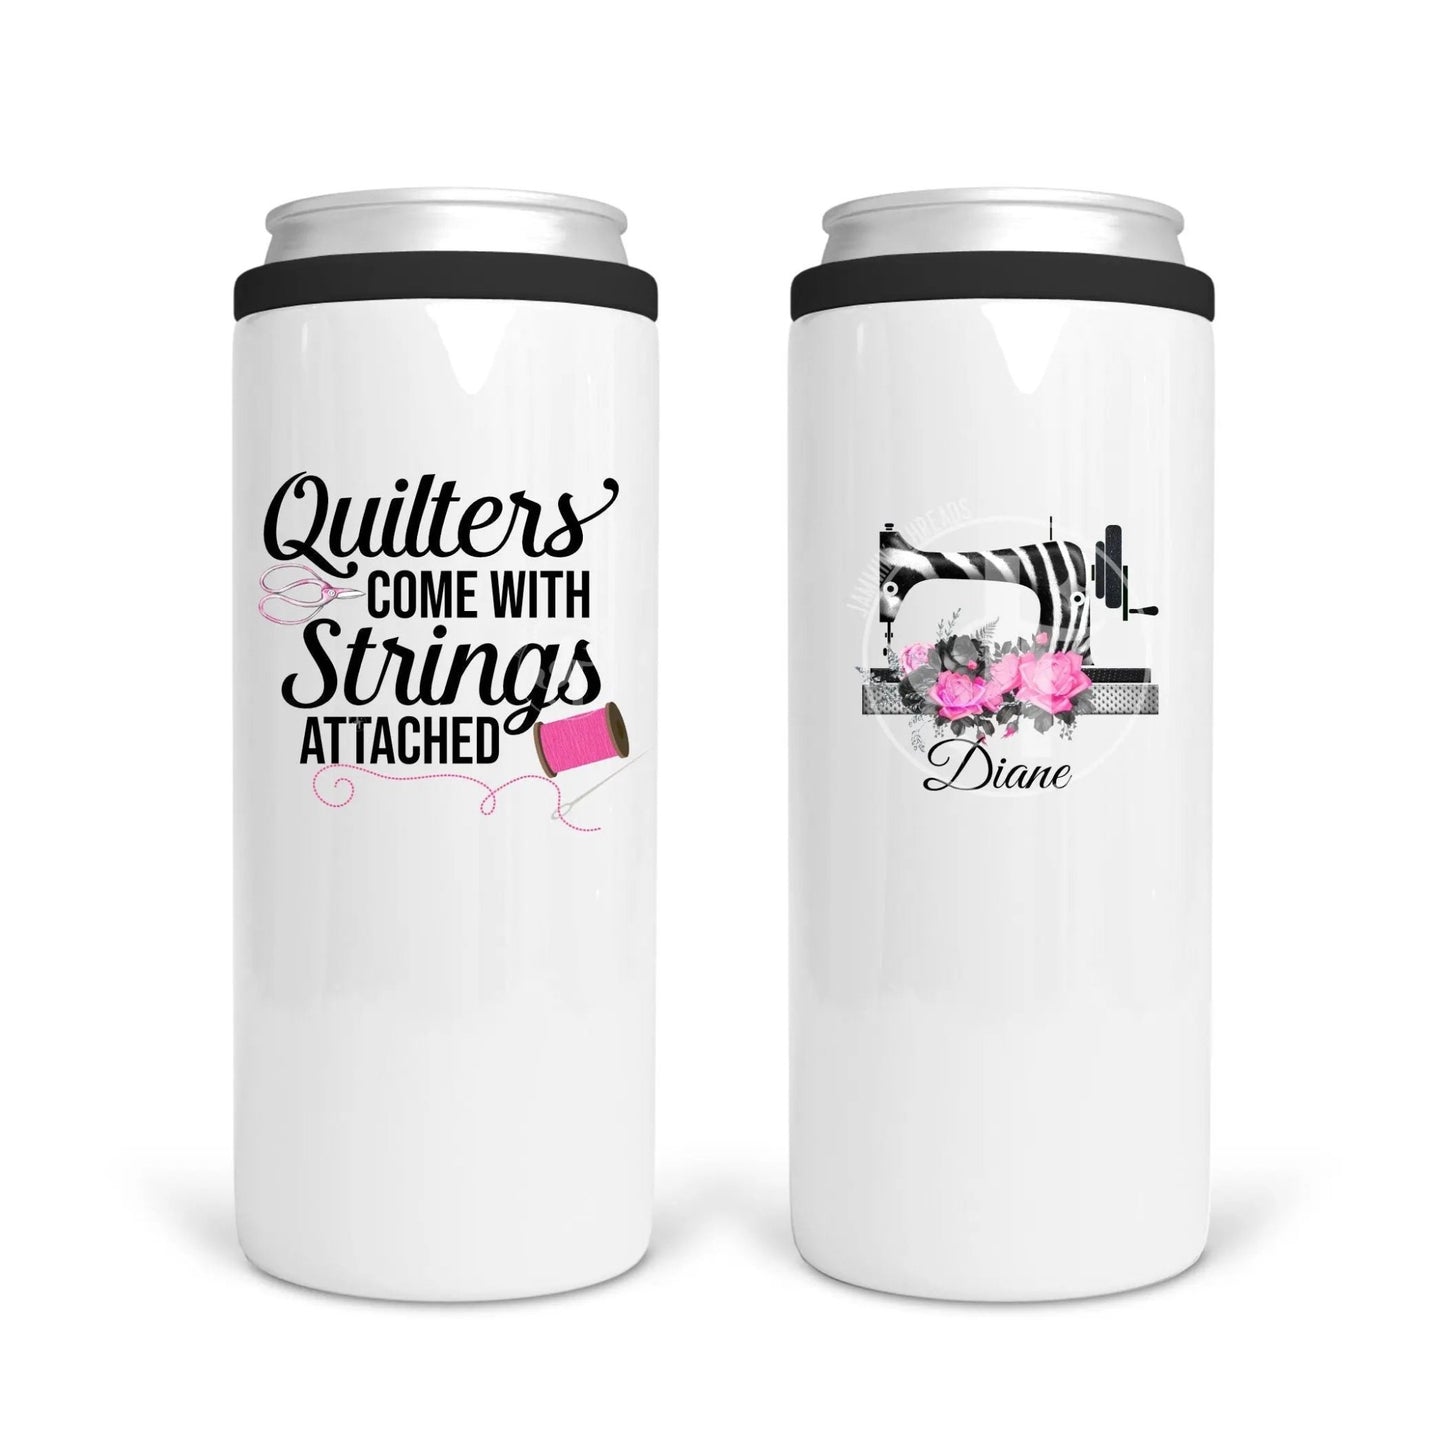 Quilters Come With Strings Attached - Jammin Threads